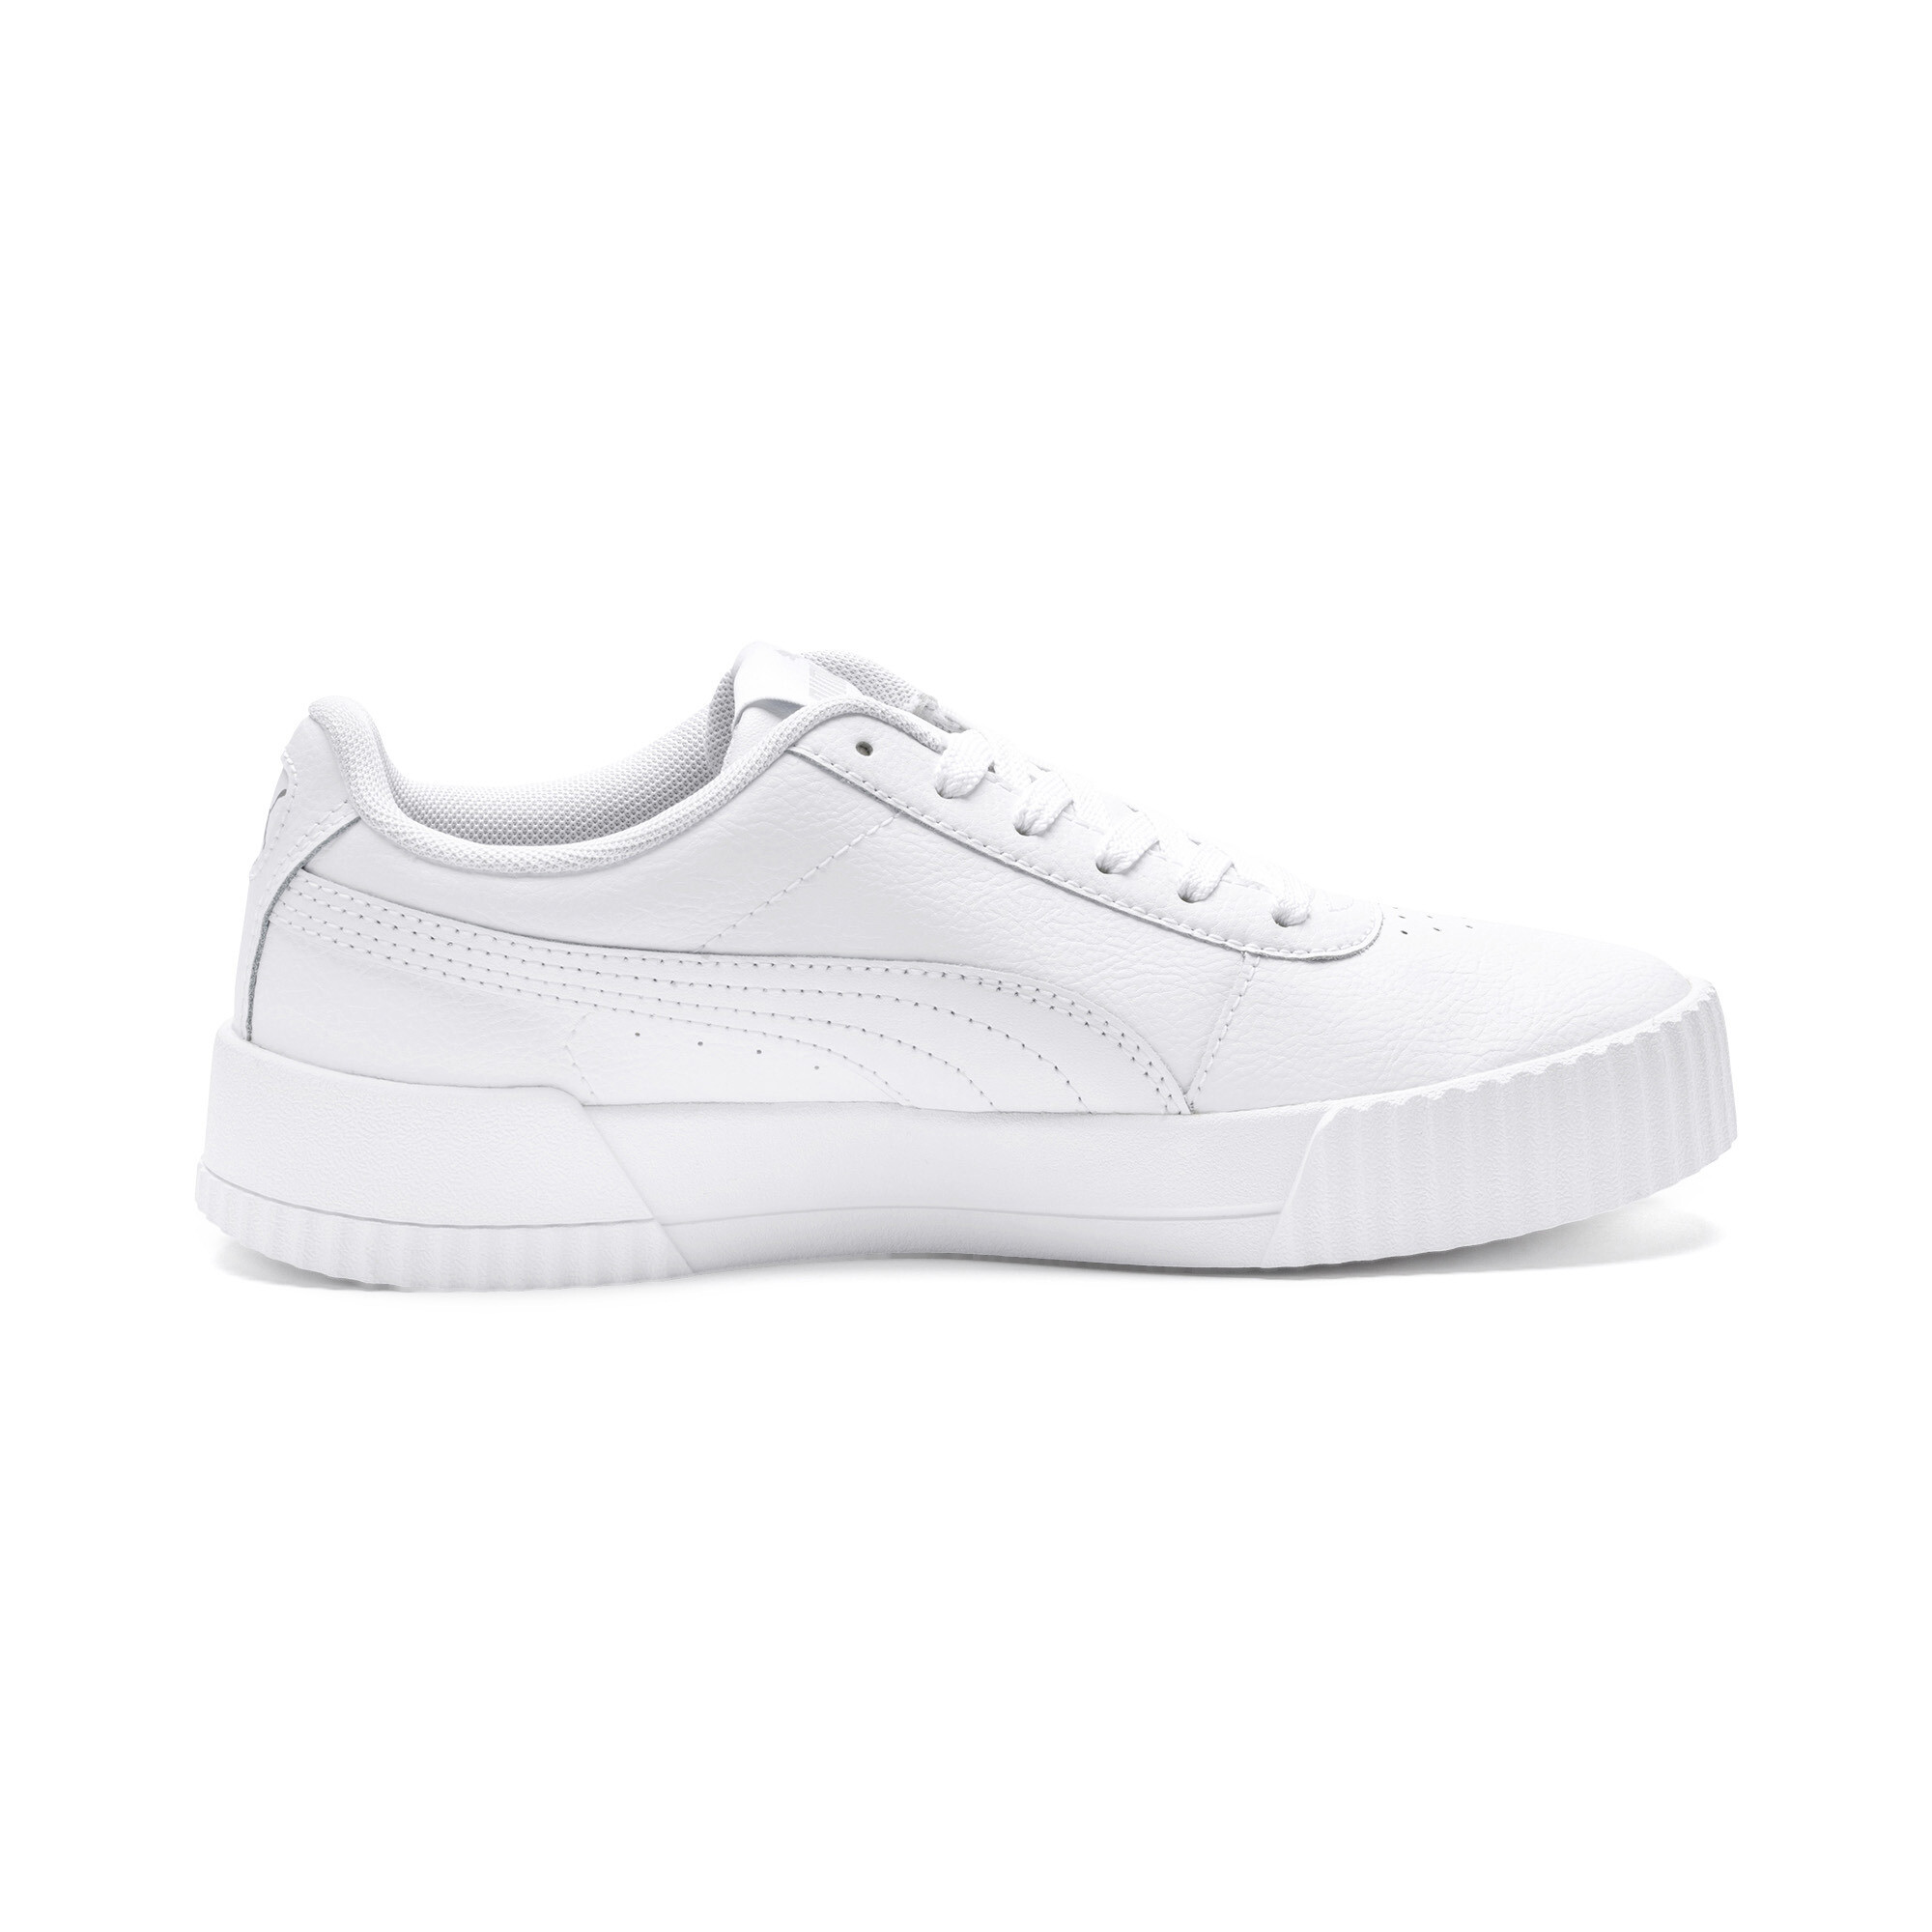 women's carina leather casual sneakers